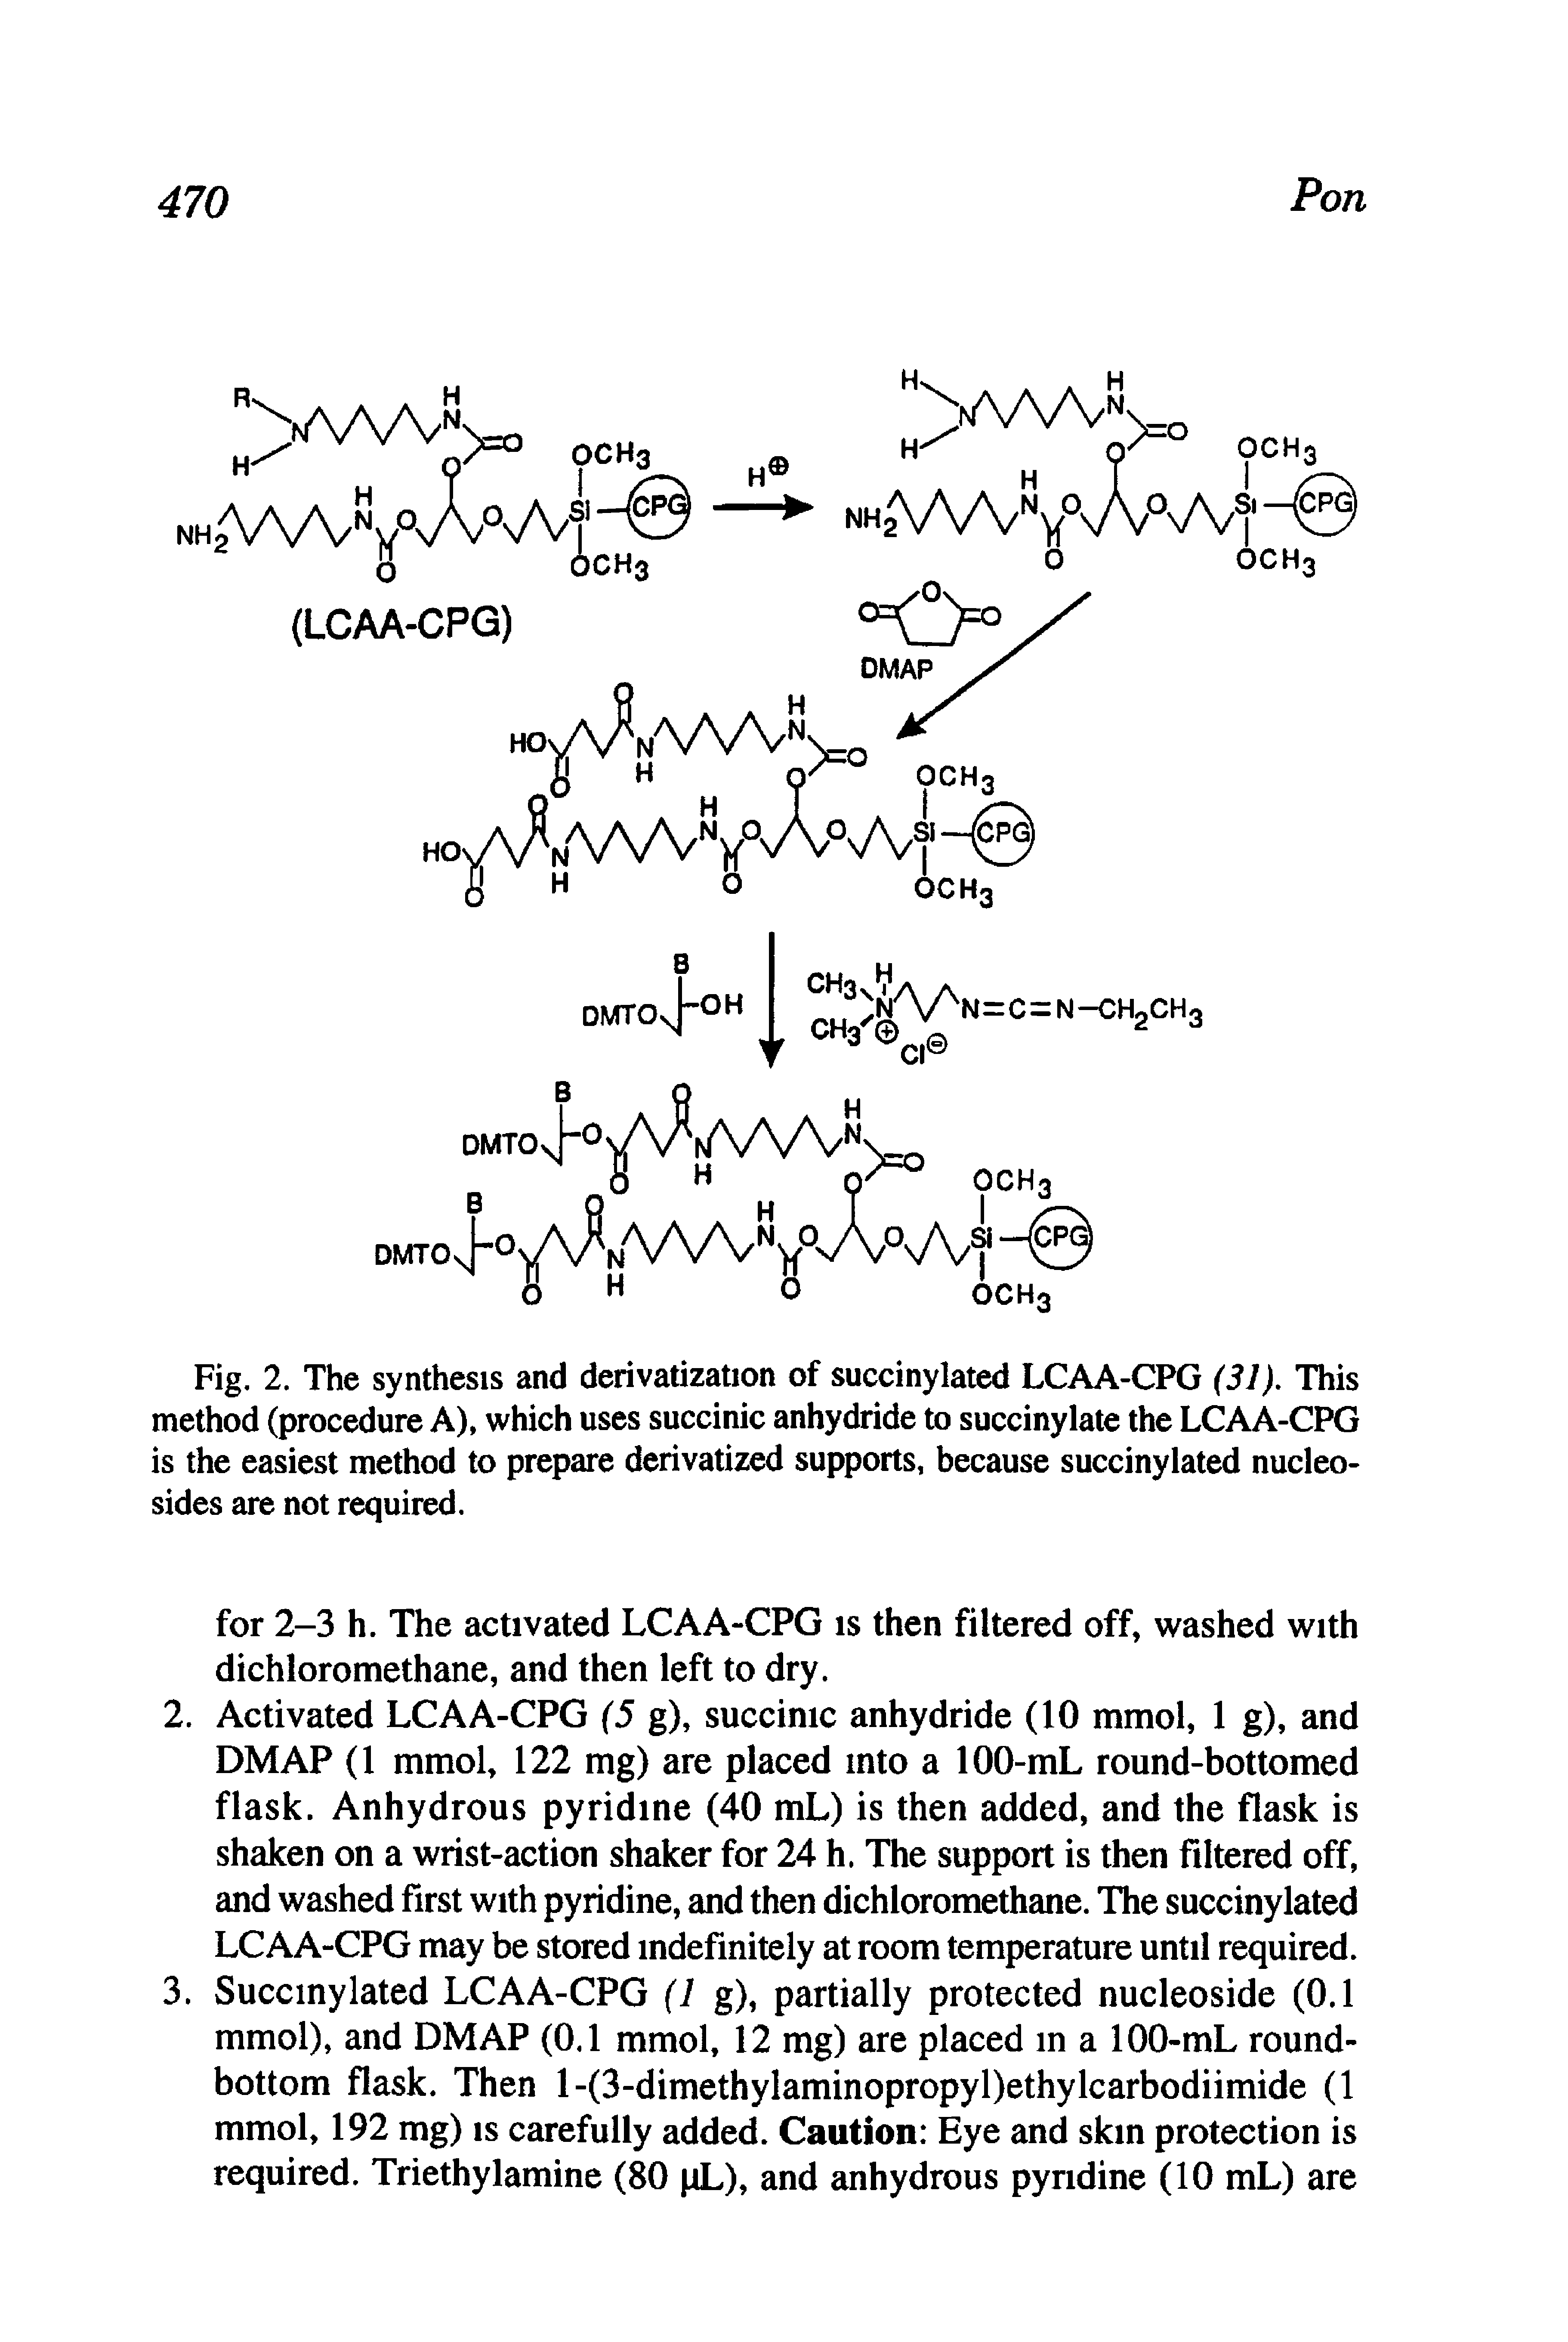 Fig. 2. The synthesis and derivatization of succinylated LCAA-CPG (31). This method (procedure A), which uses succinic anhydride to succinylate the LCAA-CPG is the easiest method to prepare derivatized supports, because succinylated nucleosides are not required.